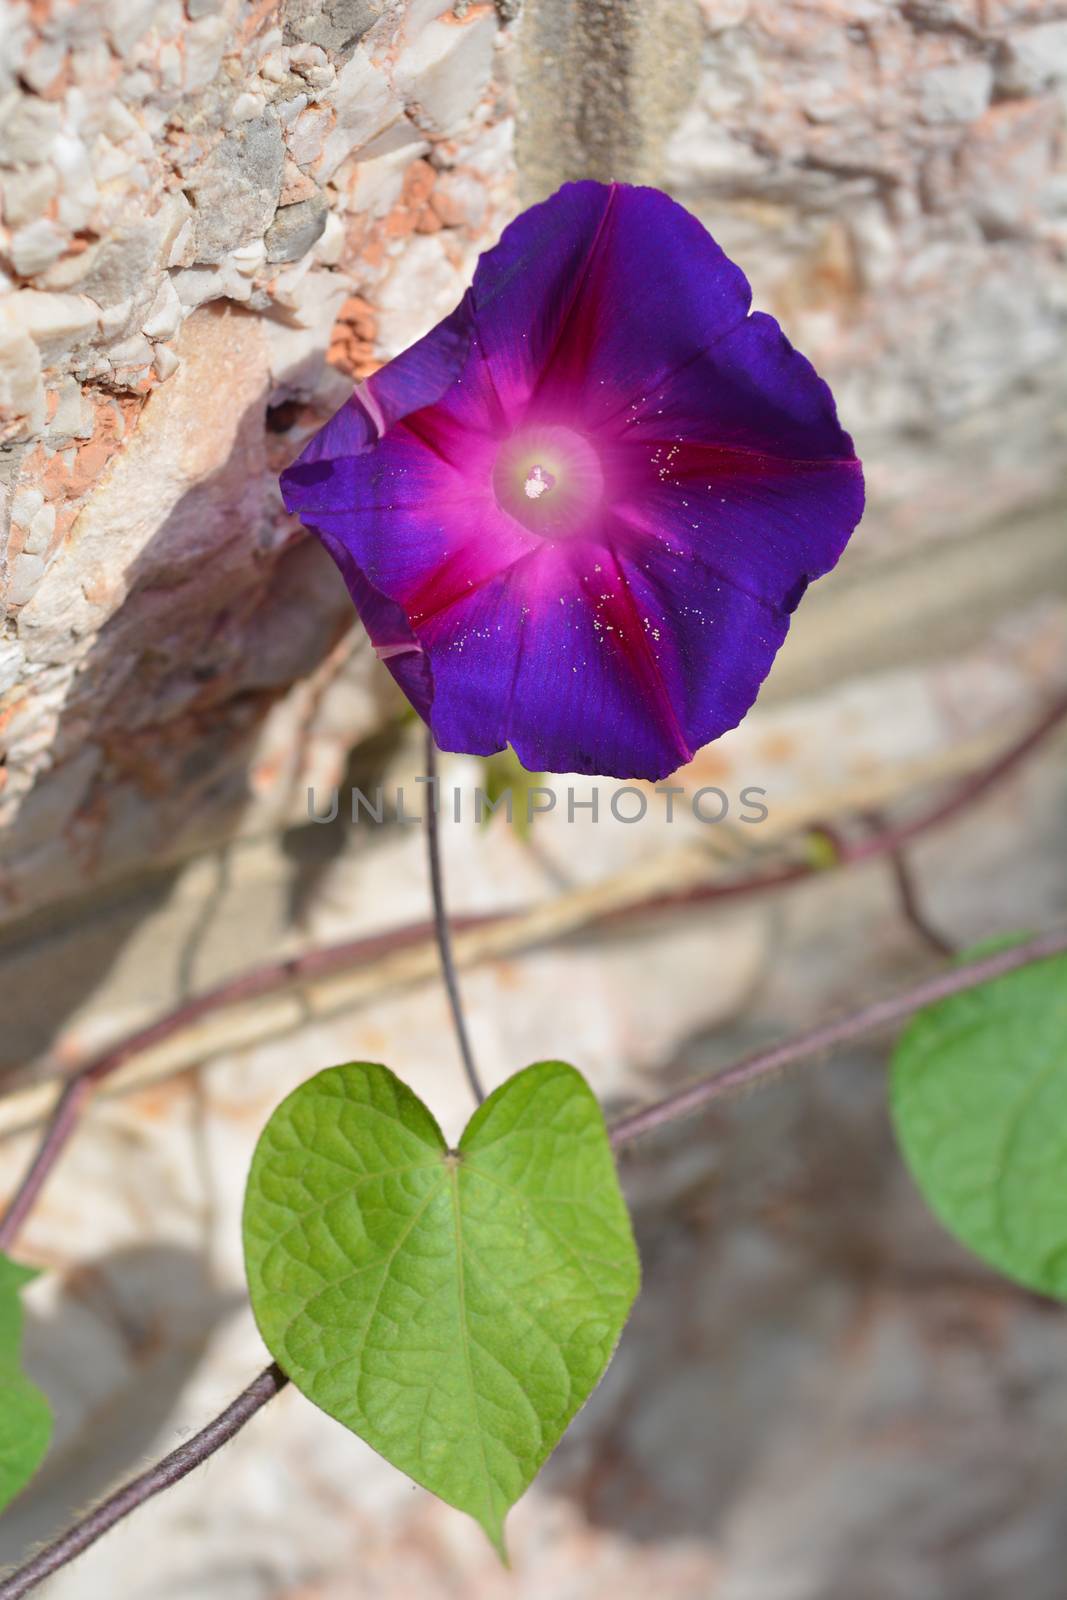 Common morning glory by nahhan